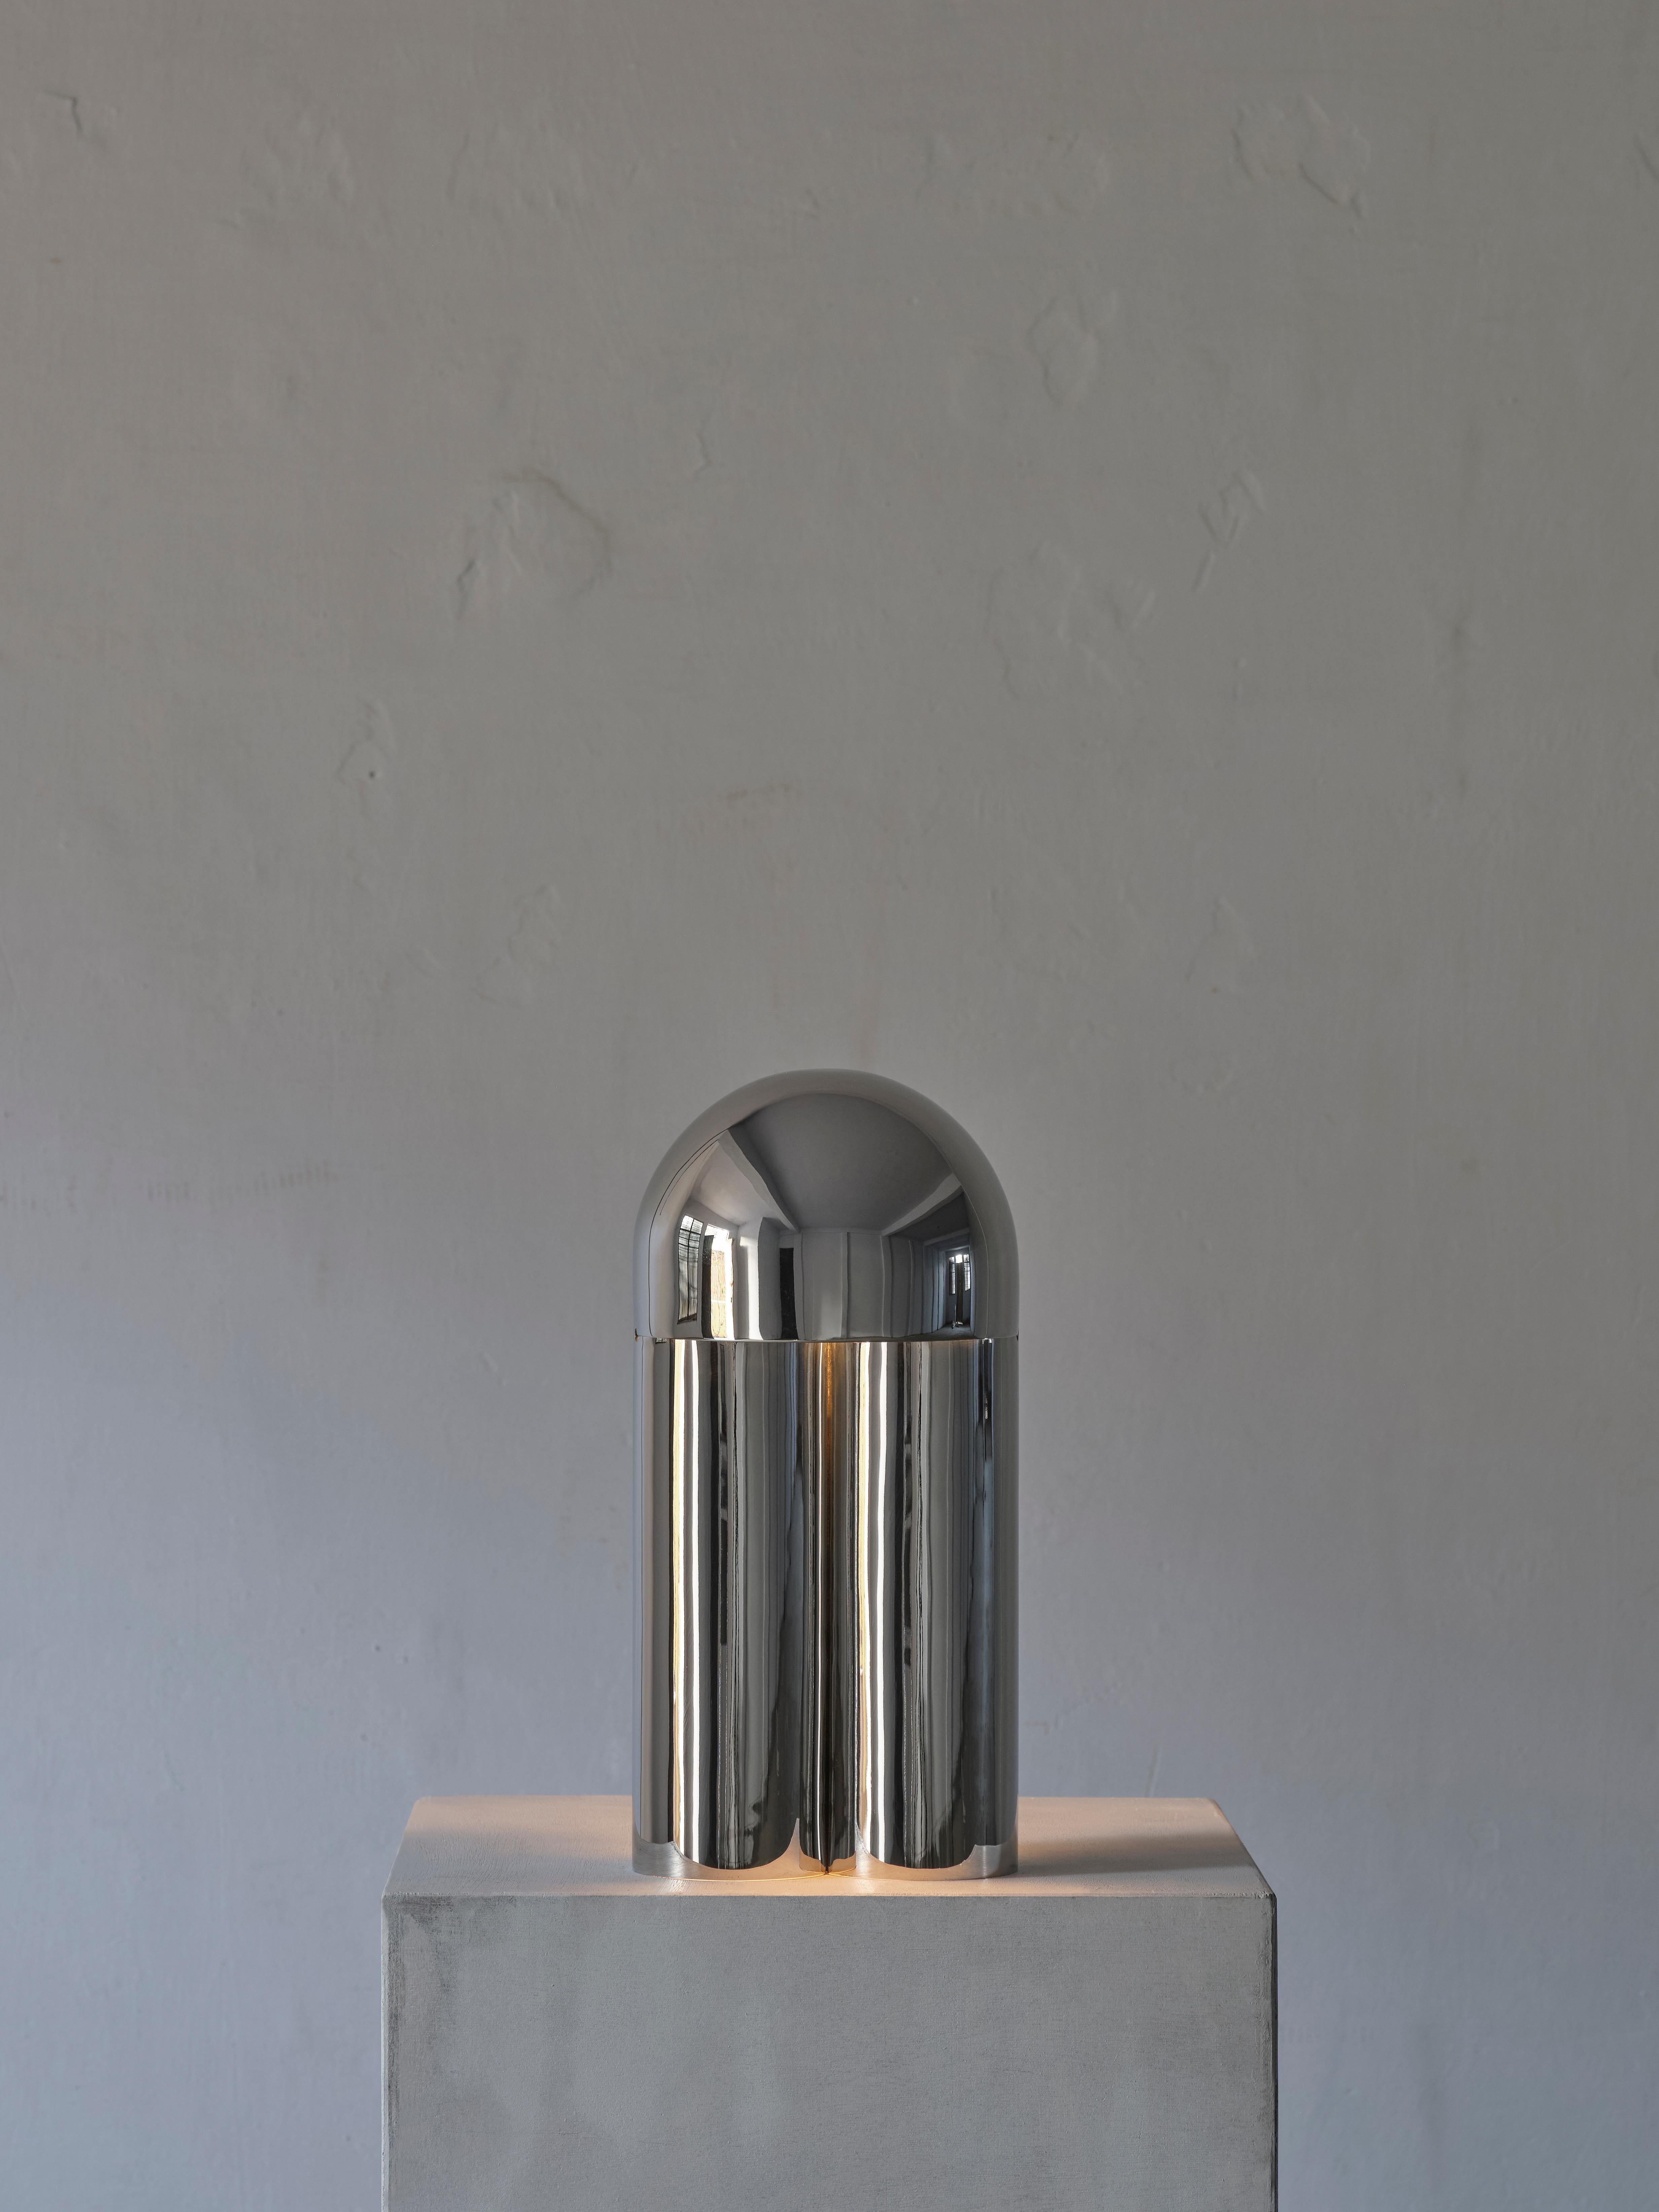 Monolith polished brass sculpted table lamp by Paul Matter
Dimensions: H 419 mm x D 203.2 mm
Weight: 3 Kgs
Lamping: 1 type E14 base, 3W - 5W led, warm white
CE certified, voltage 220V - 240V
Dimmable upon request
Materials: Brass

Custom